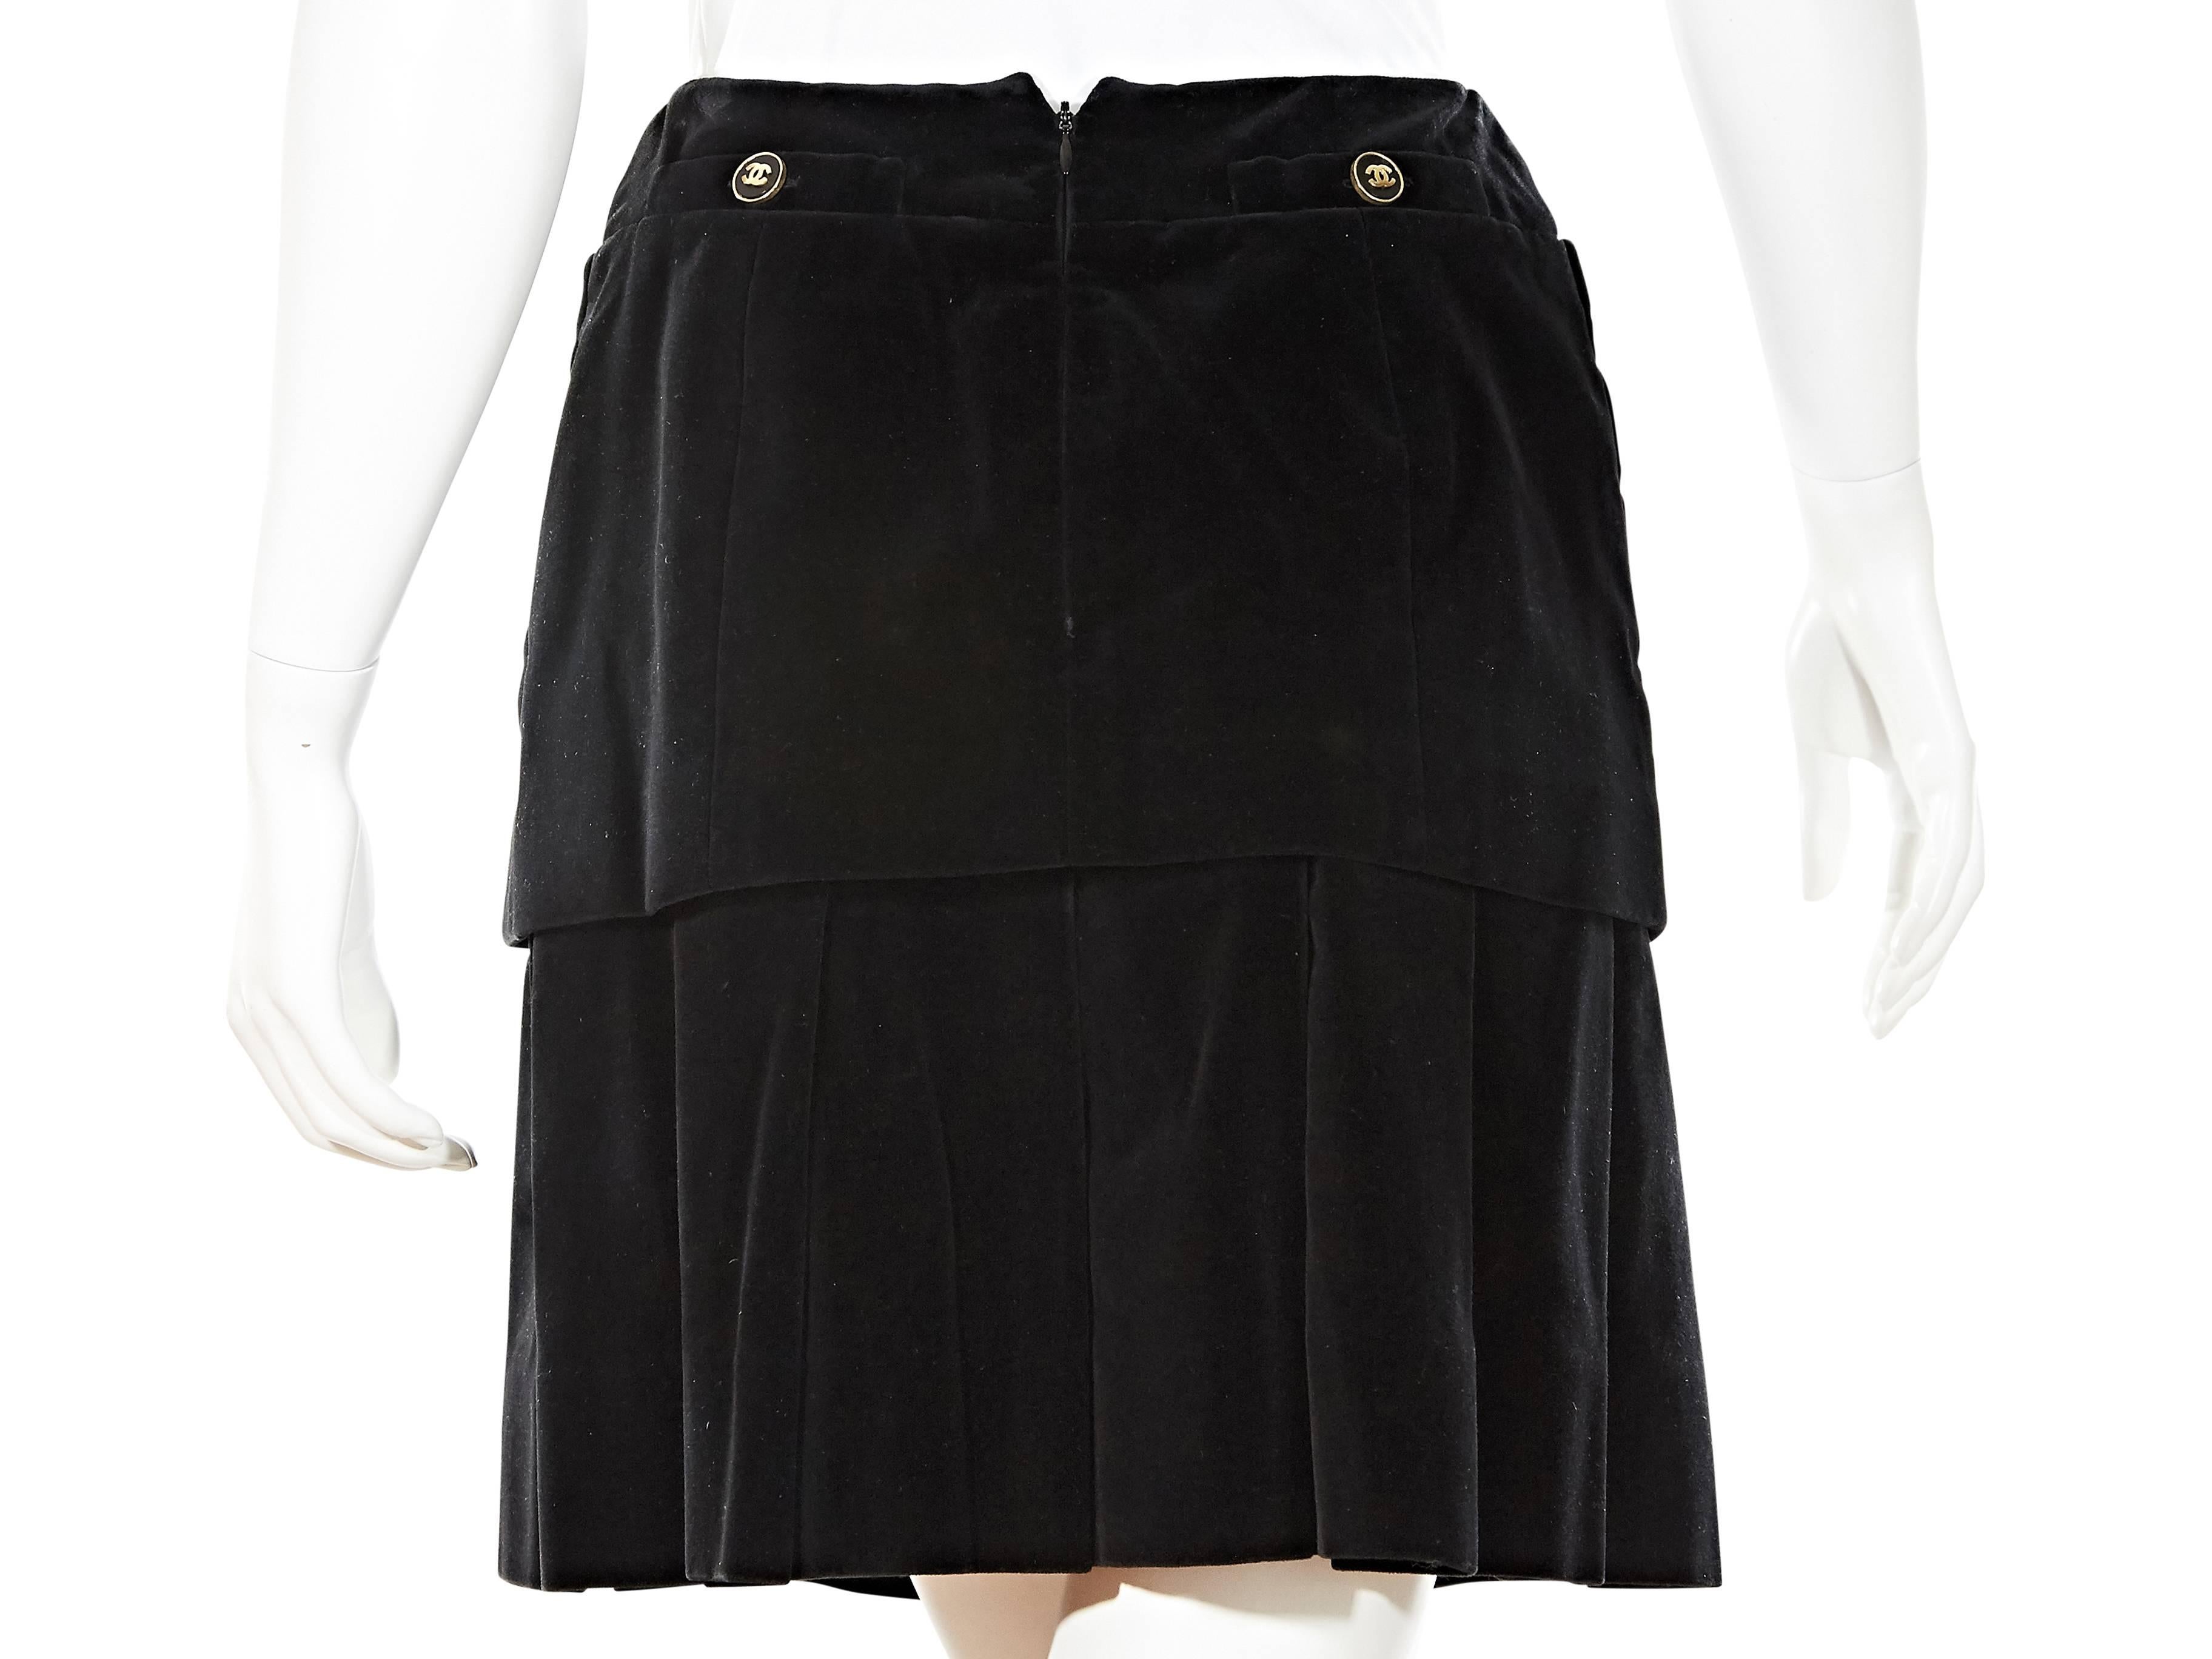 Black velvet skirt by Chanel. Tiered design with box pleated hem.  Front patch and back button pockets. Concealed back zip closure. 

Sizing converted to US size for New York based store purposes.